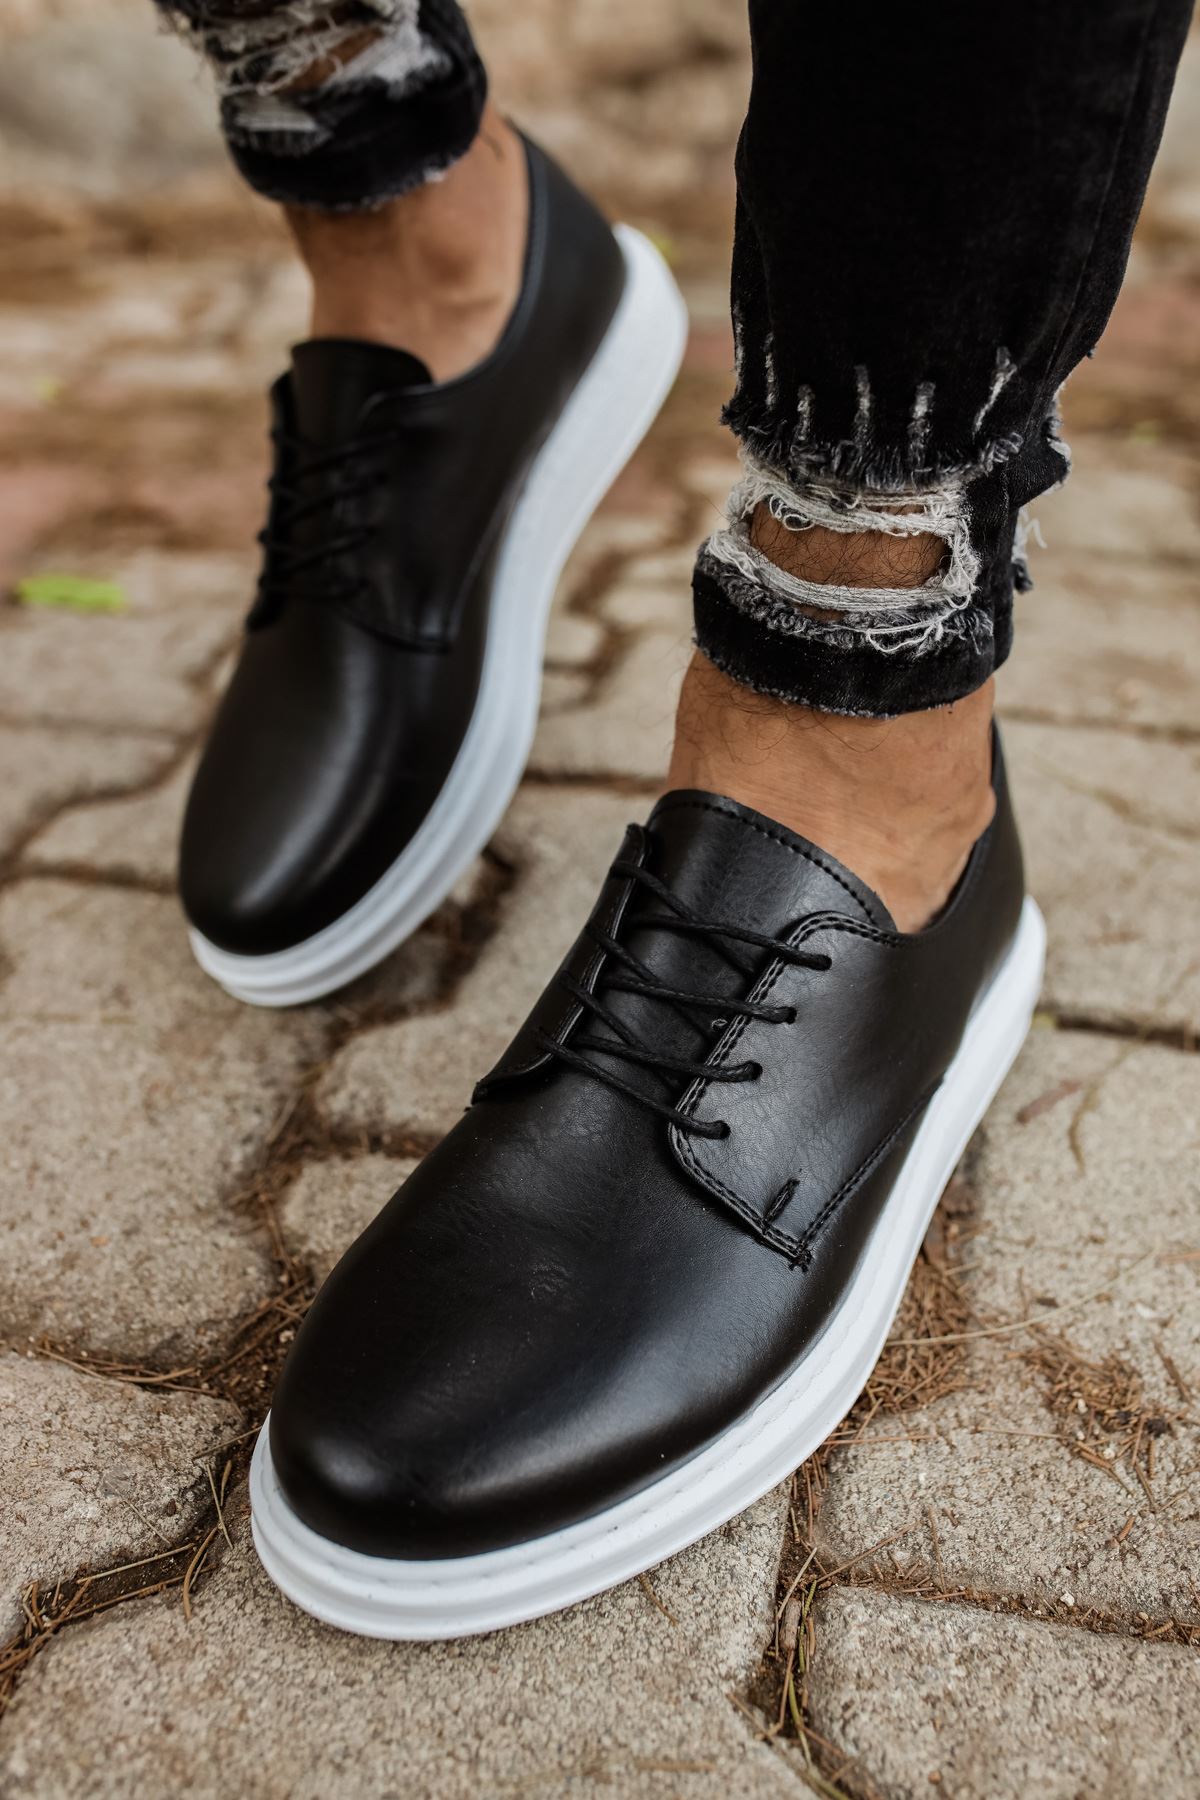 Chekich Suede Black Men Wedding Shoes Artificial Leather Spring & Fall Seasons Lace Up Classic Business Suits Wear Fashion Sewing Outsole Casual Gentlemen Odorless Sneakers Air Comfortable Flexible Daily CH003 V7